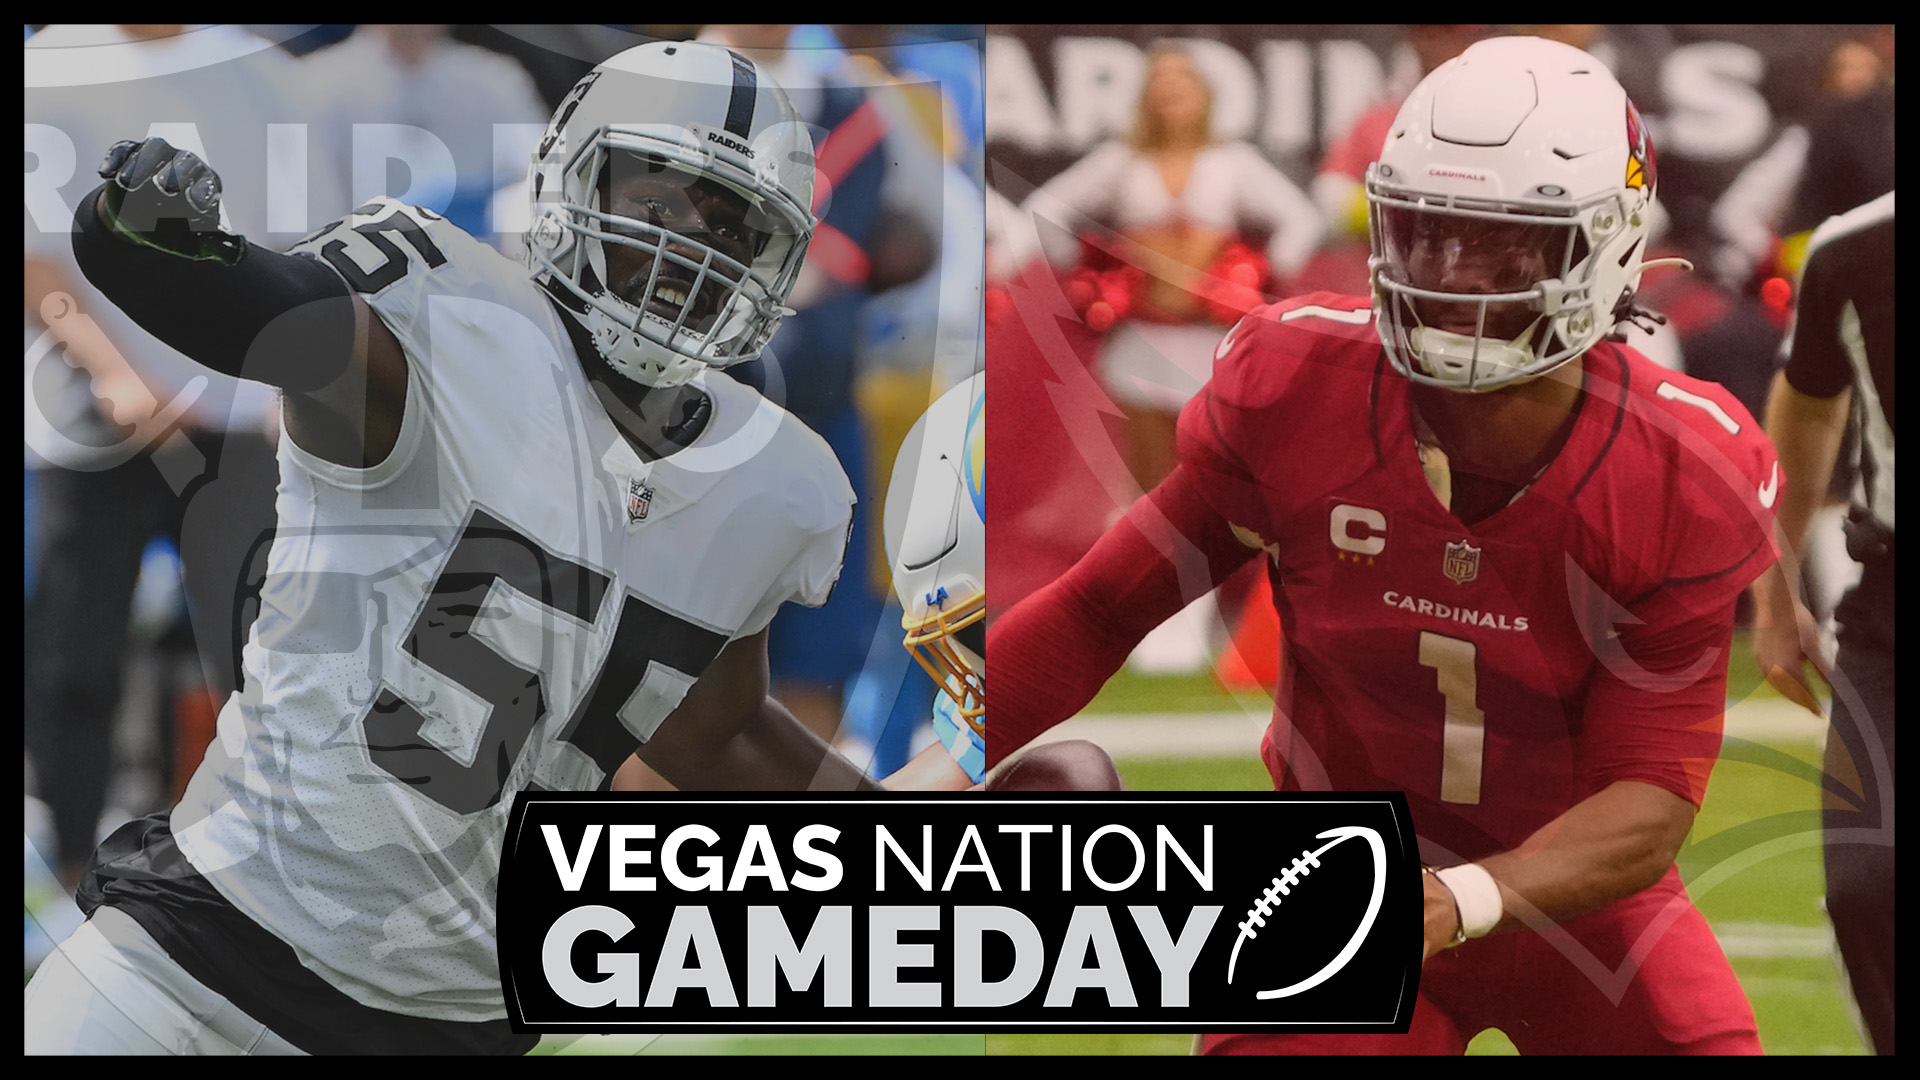 Raiders Seek First Win Over Cardinals in Home Opener | Vegas Nation Gameday